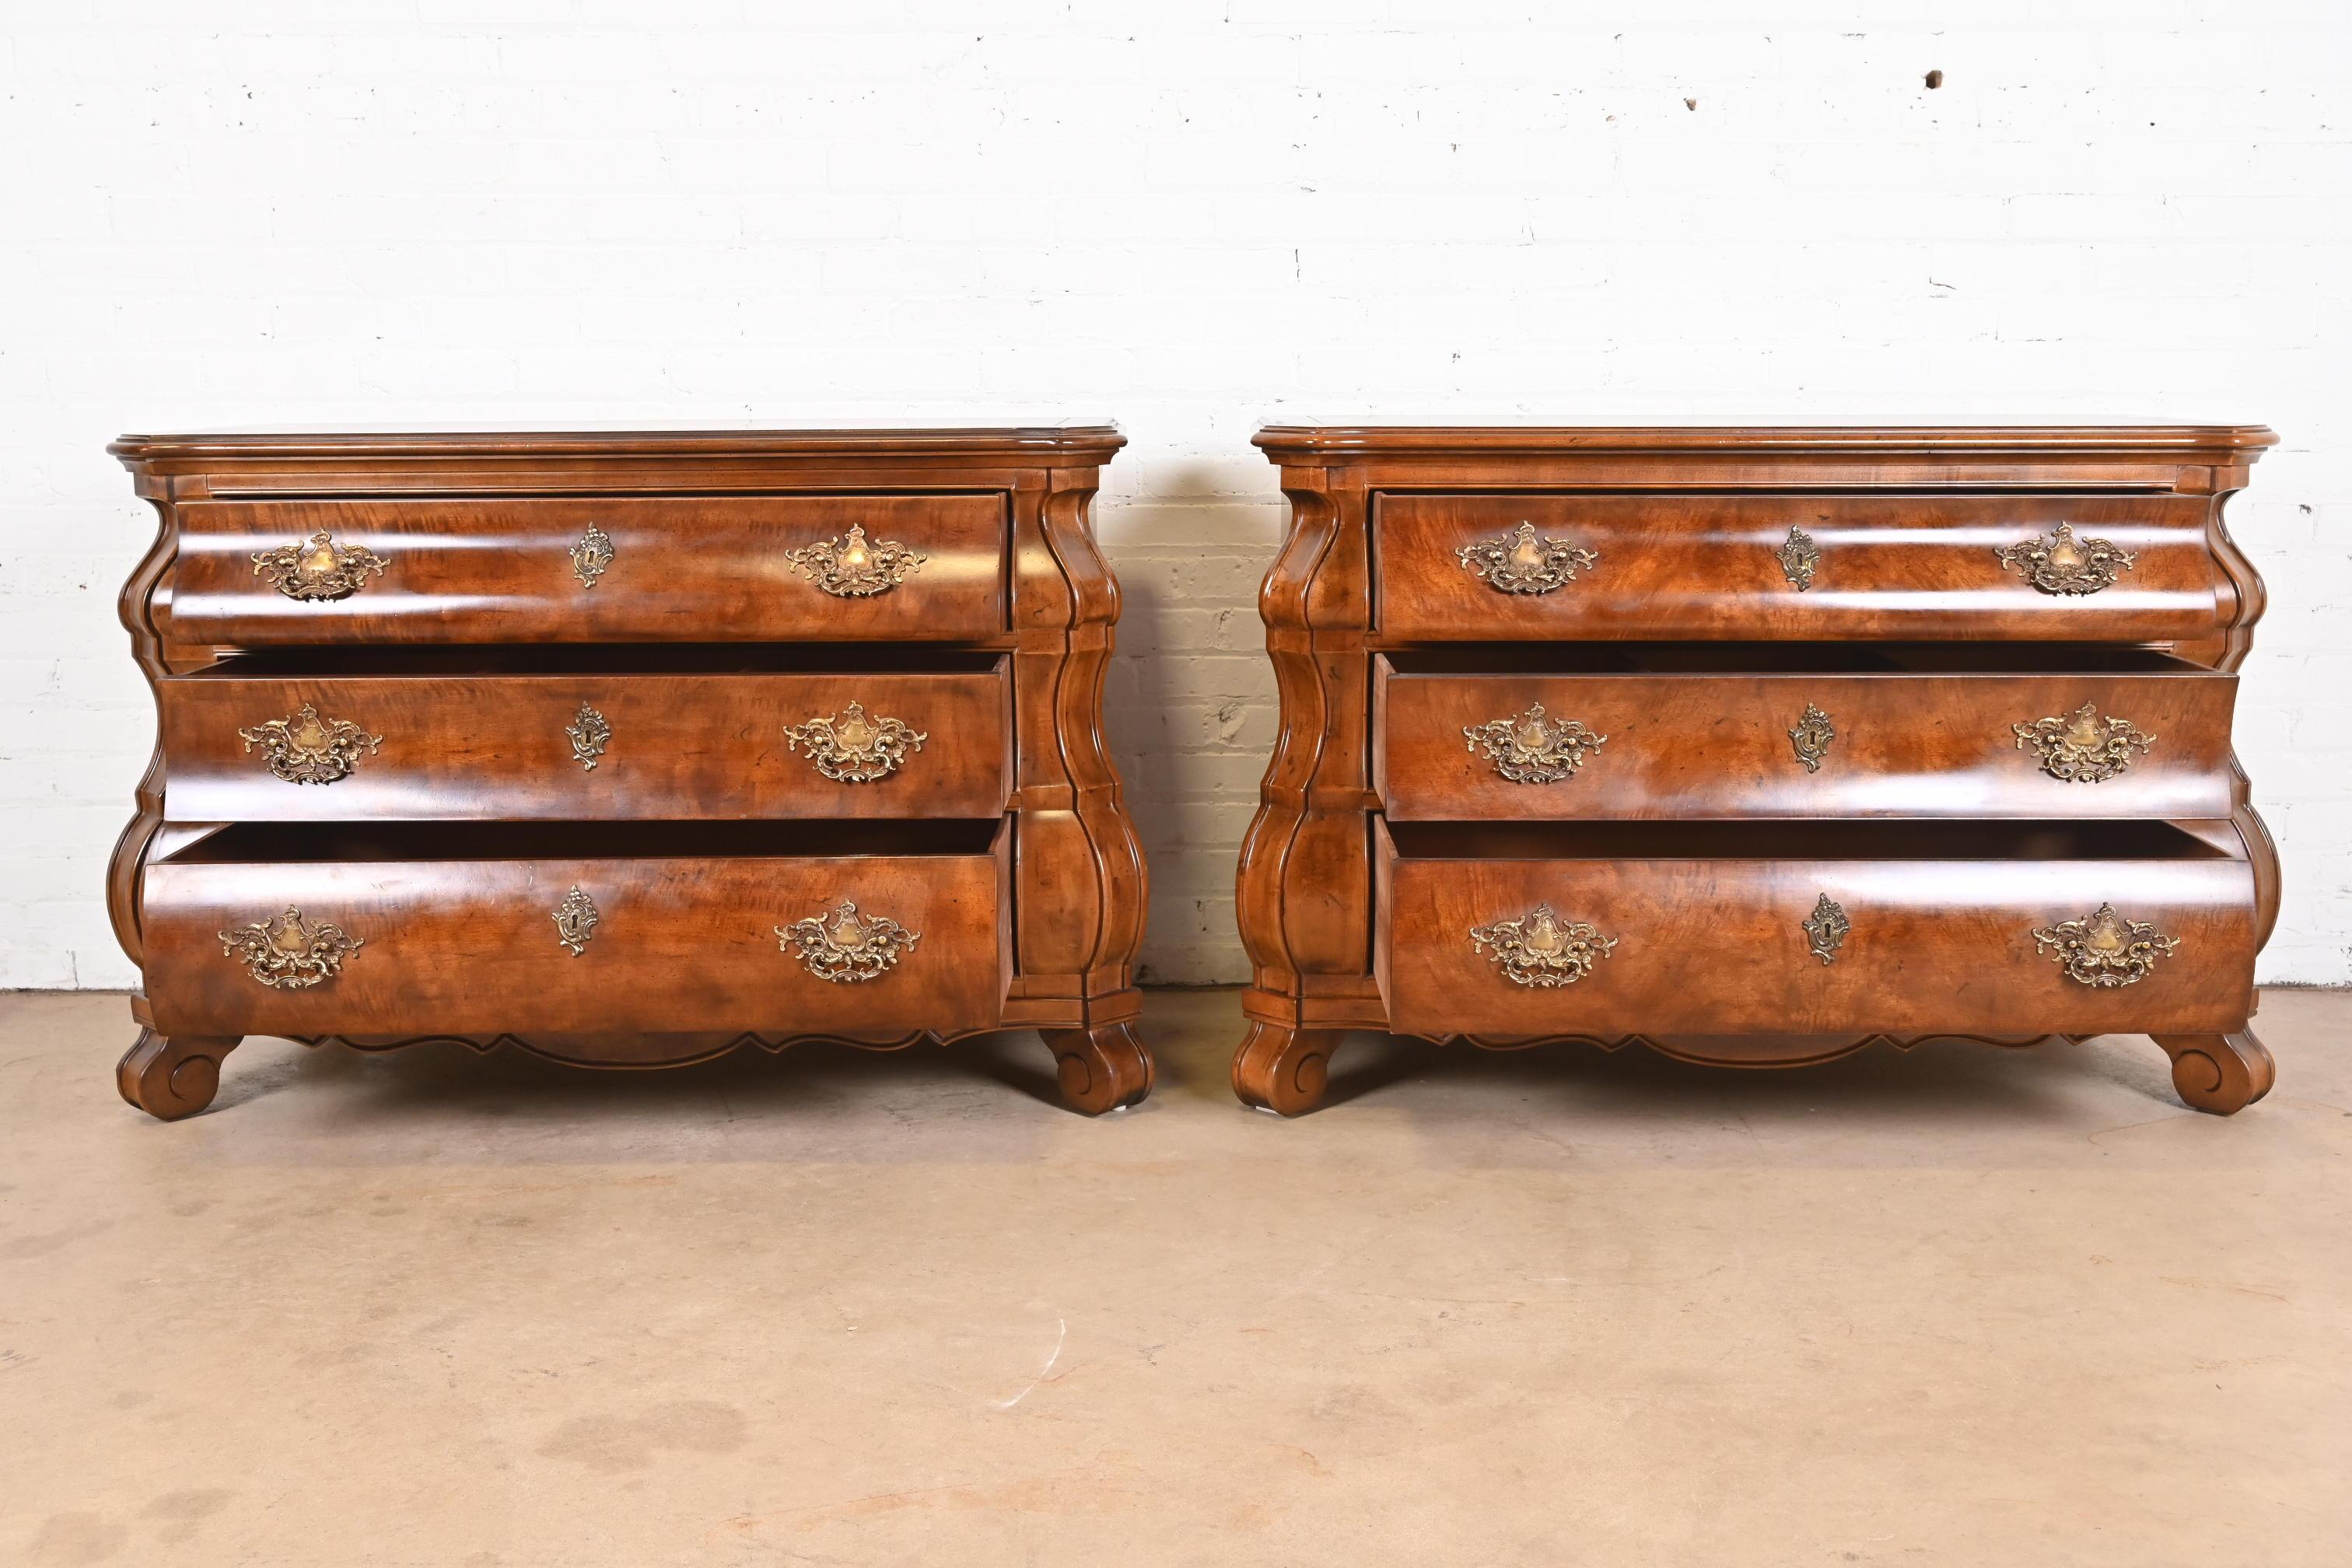 Henredon Italian Baroque Burled Mahogany Bombay Chests or Commodes, Pair For Sale 3